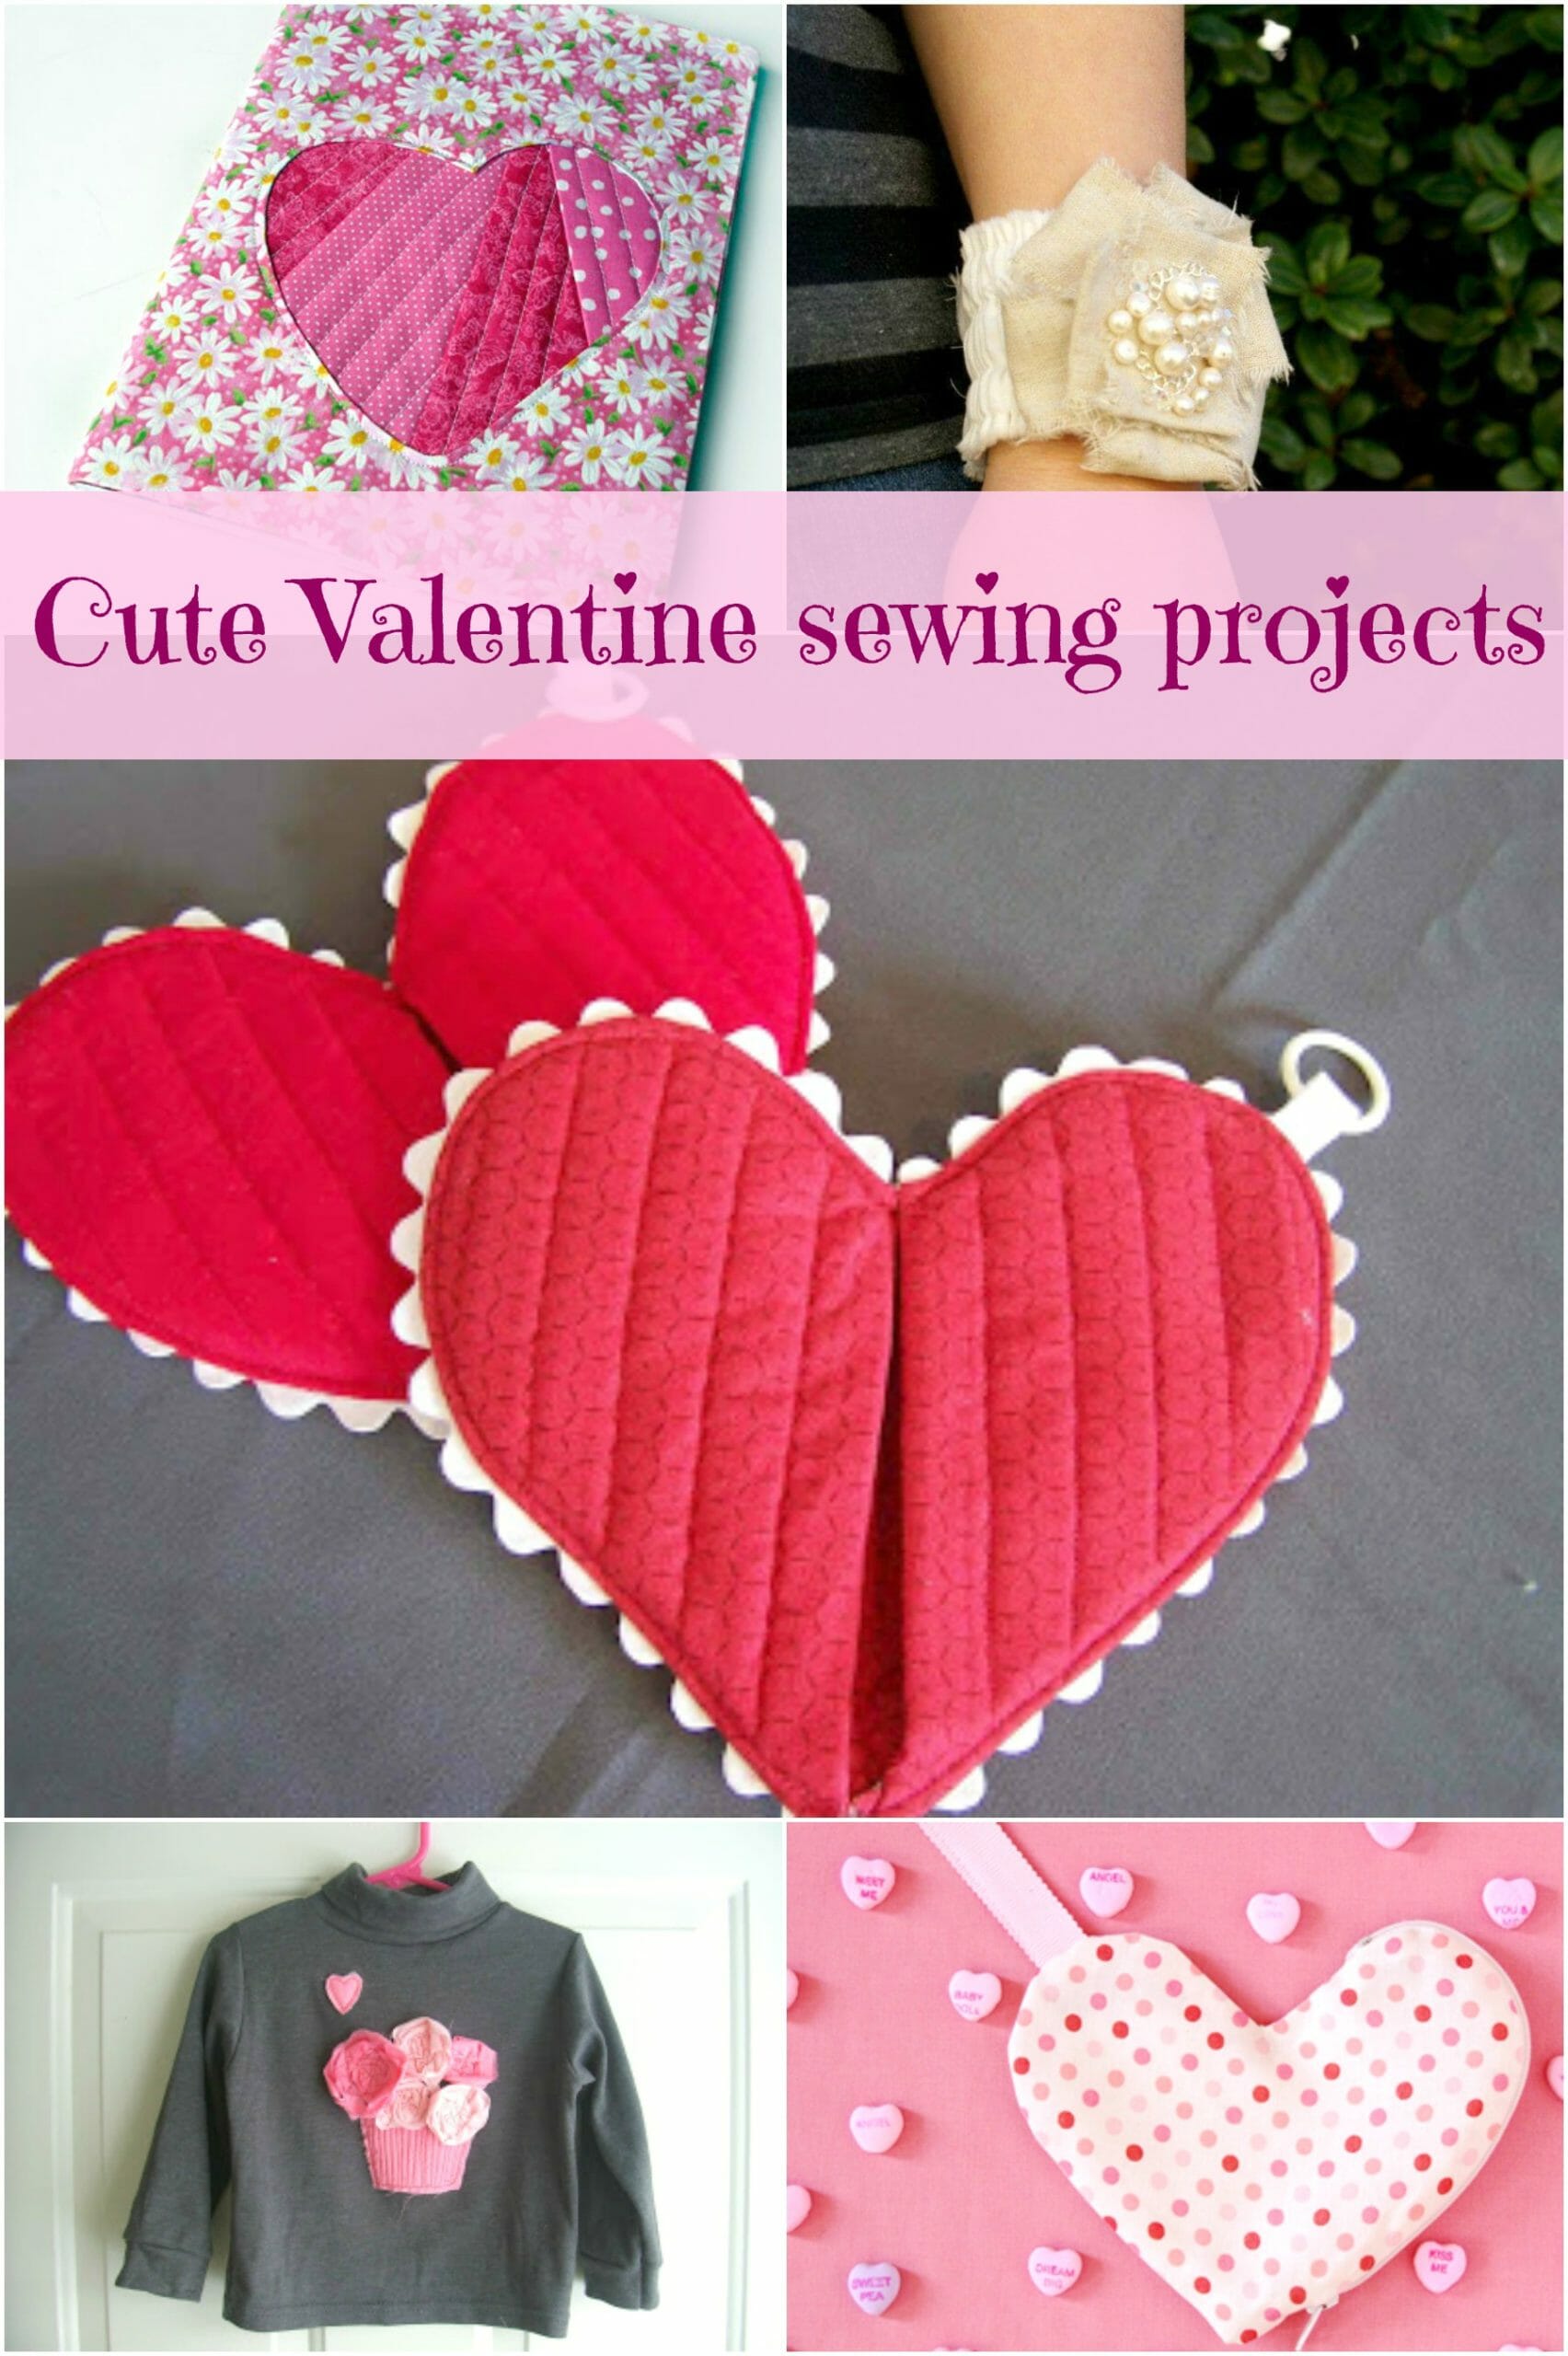 Cute Valentine sewing projects